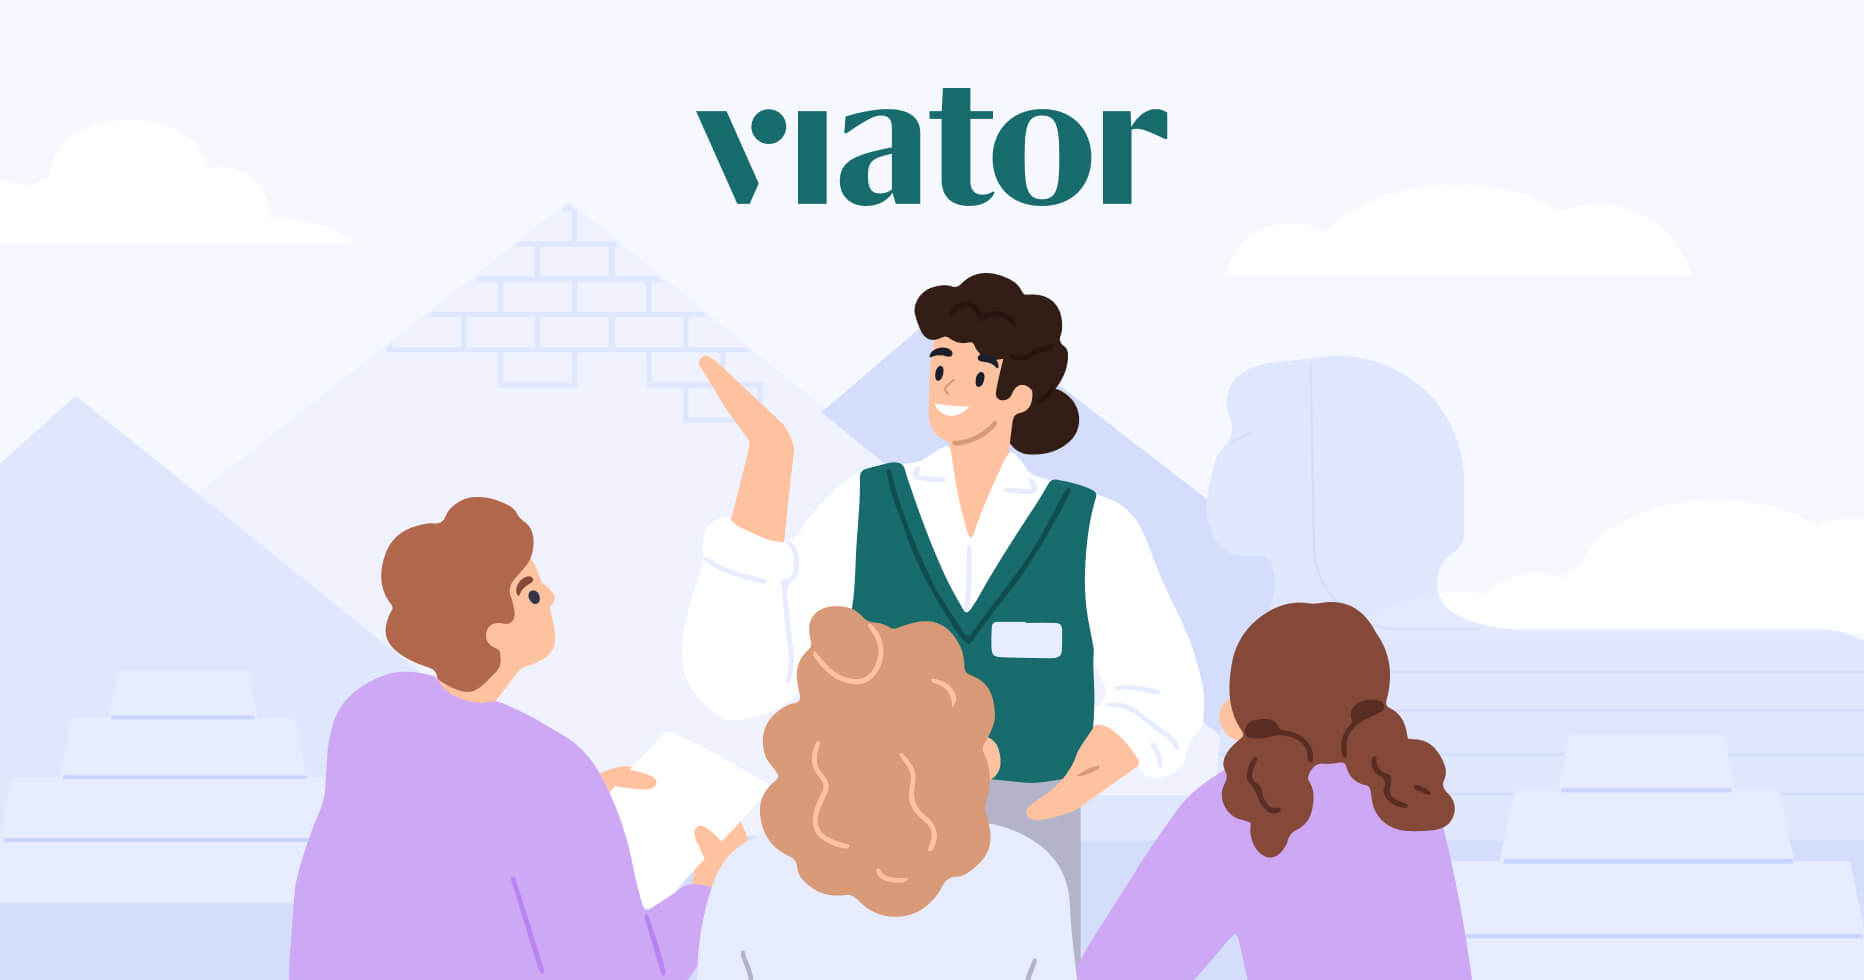 Earn on tours and activities worldwide with Viator